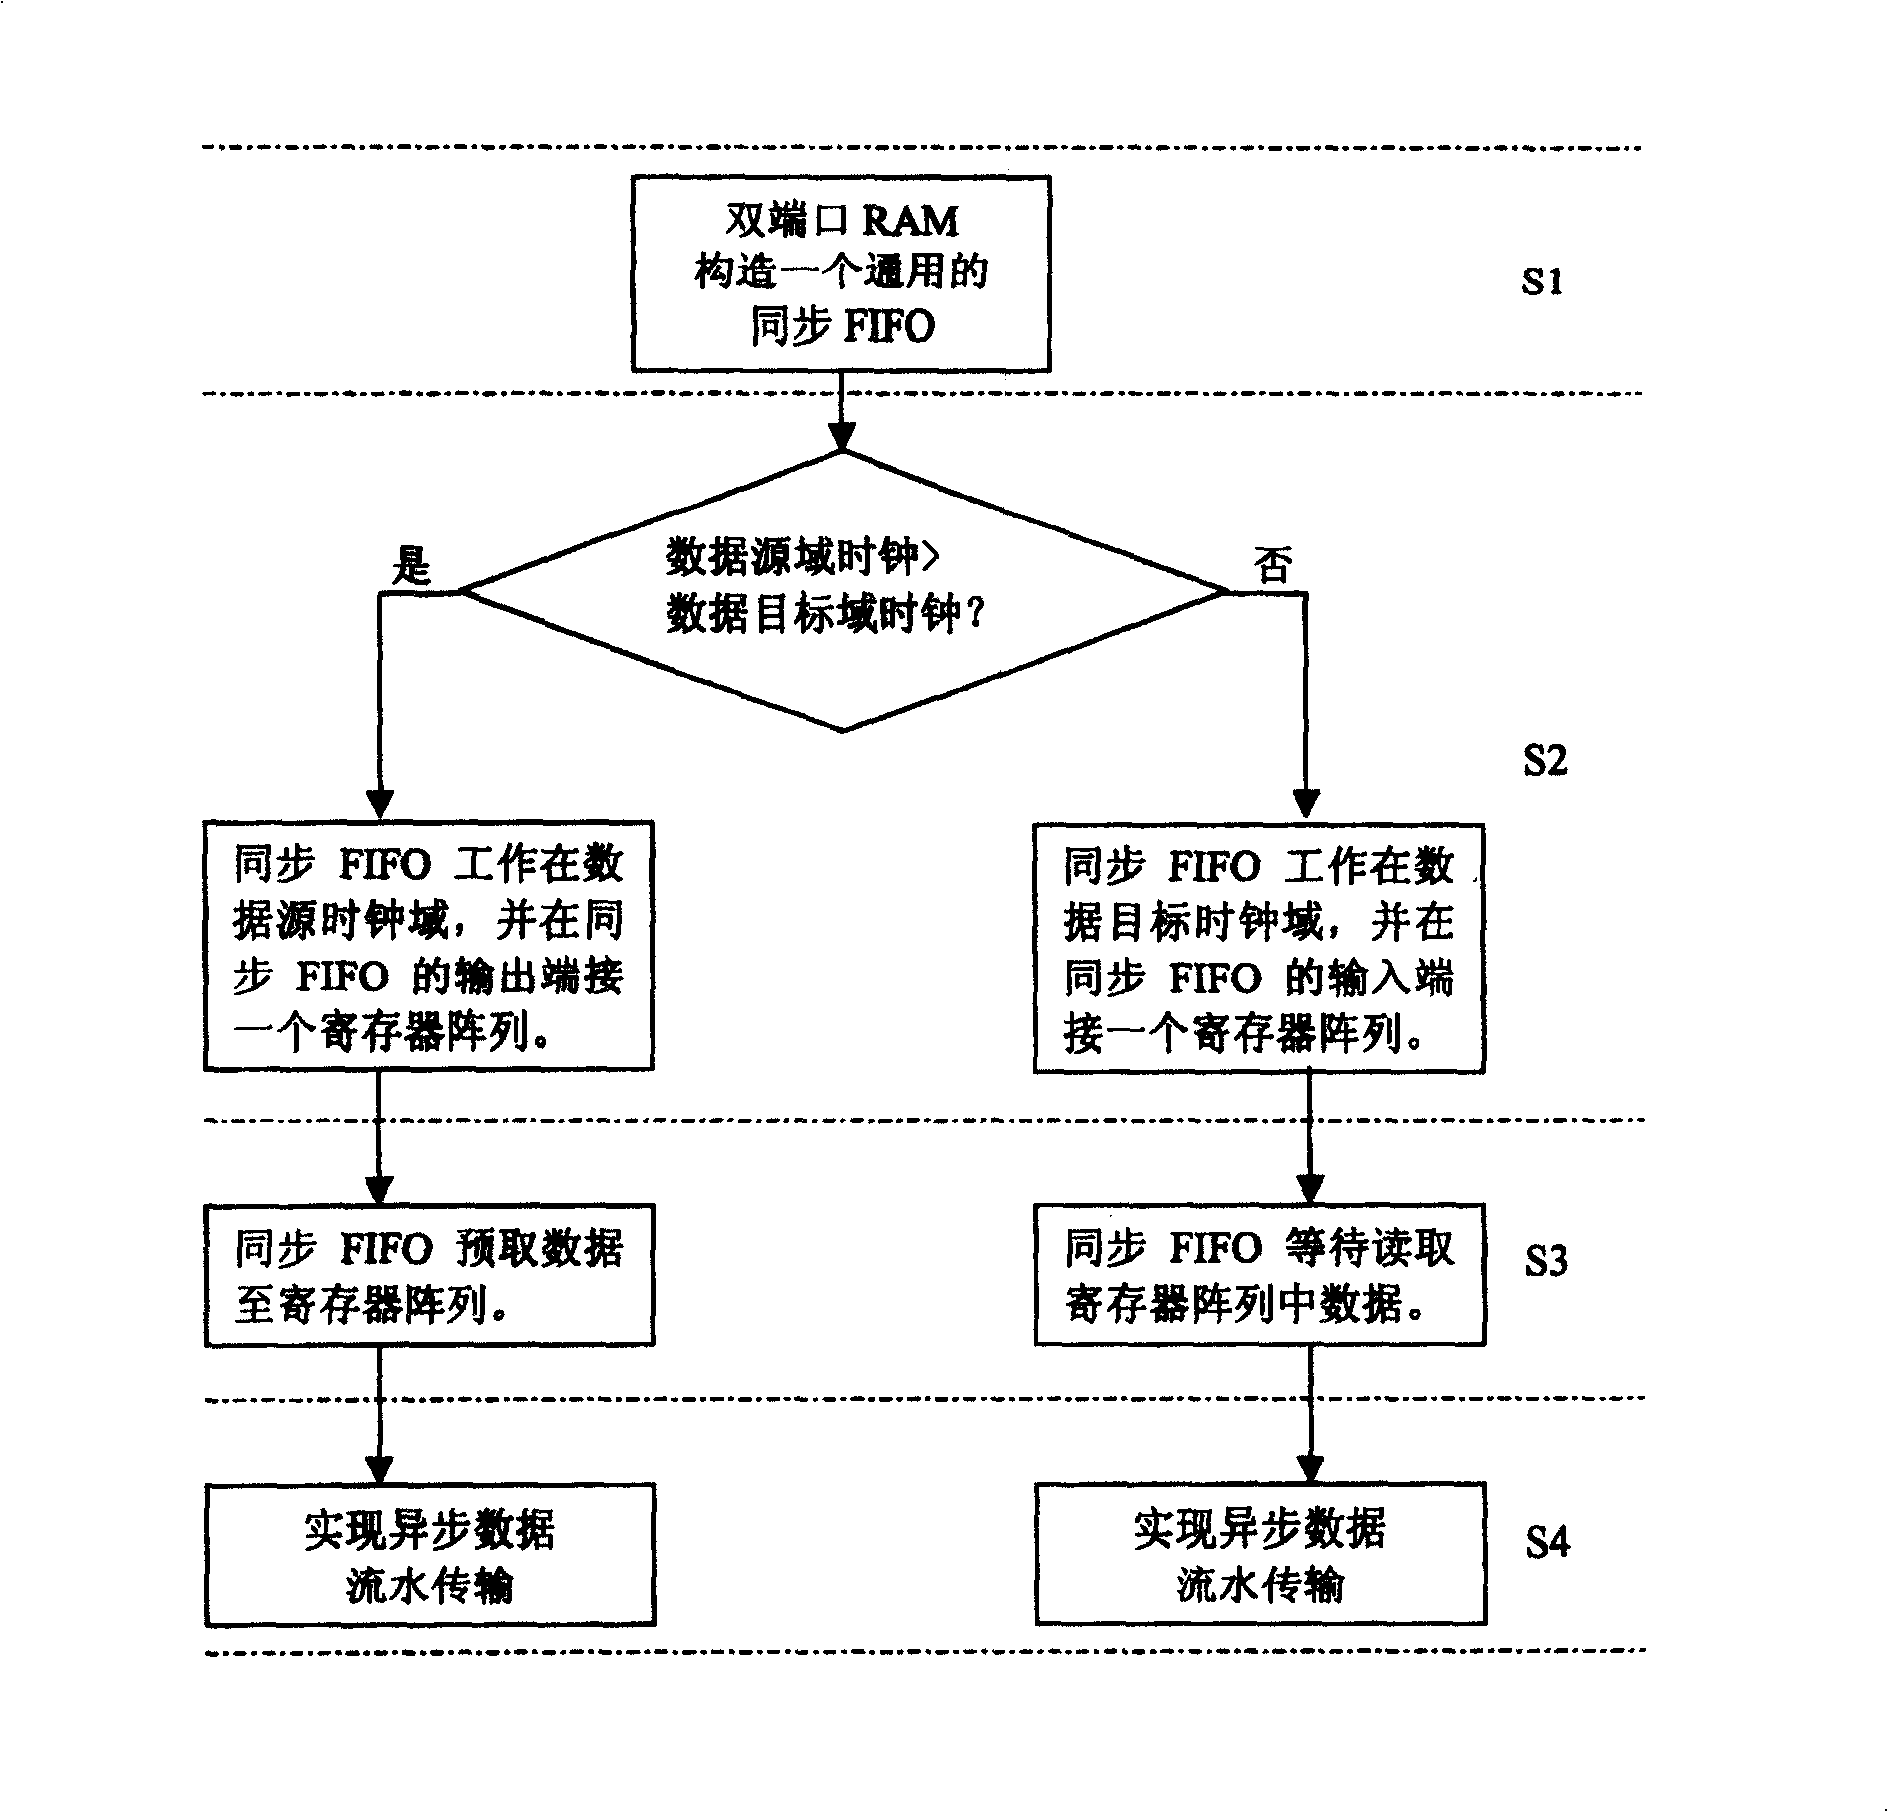 Implementing asynchronous first-in first-out data transmission by double-port direct access storage device